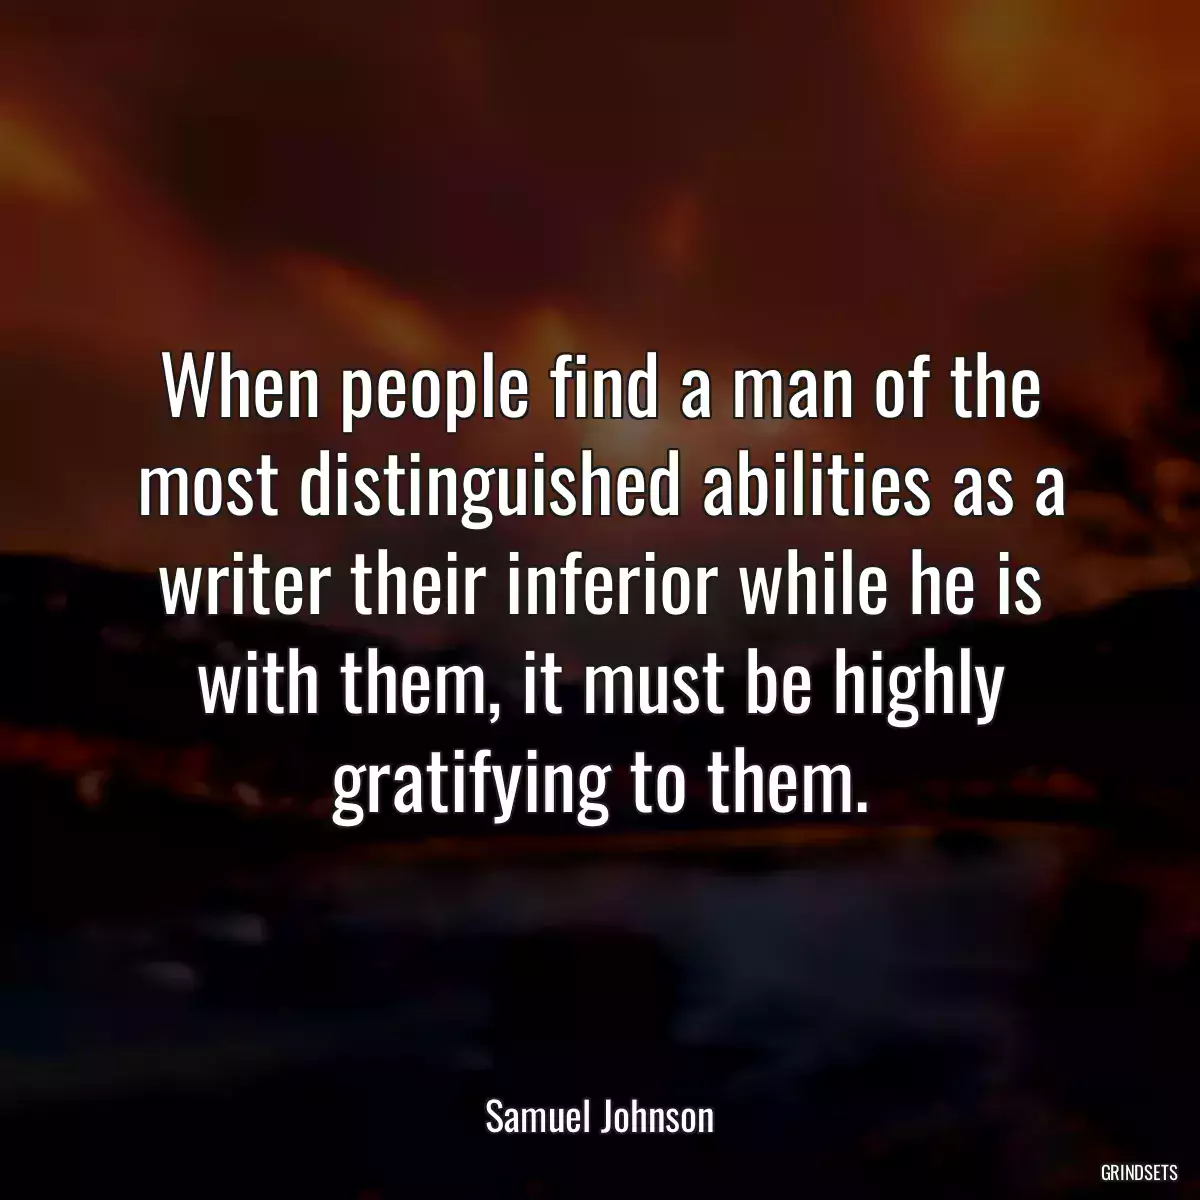 When people find a man of the most distinguished abilities as a writer their inferior while he is with them, it must be highly gratifying to them.